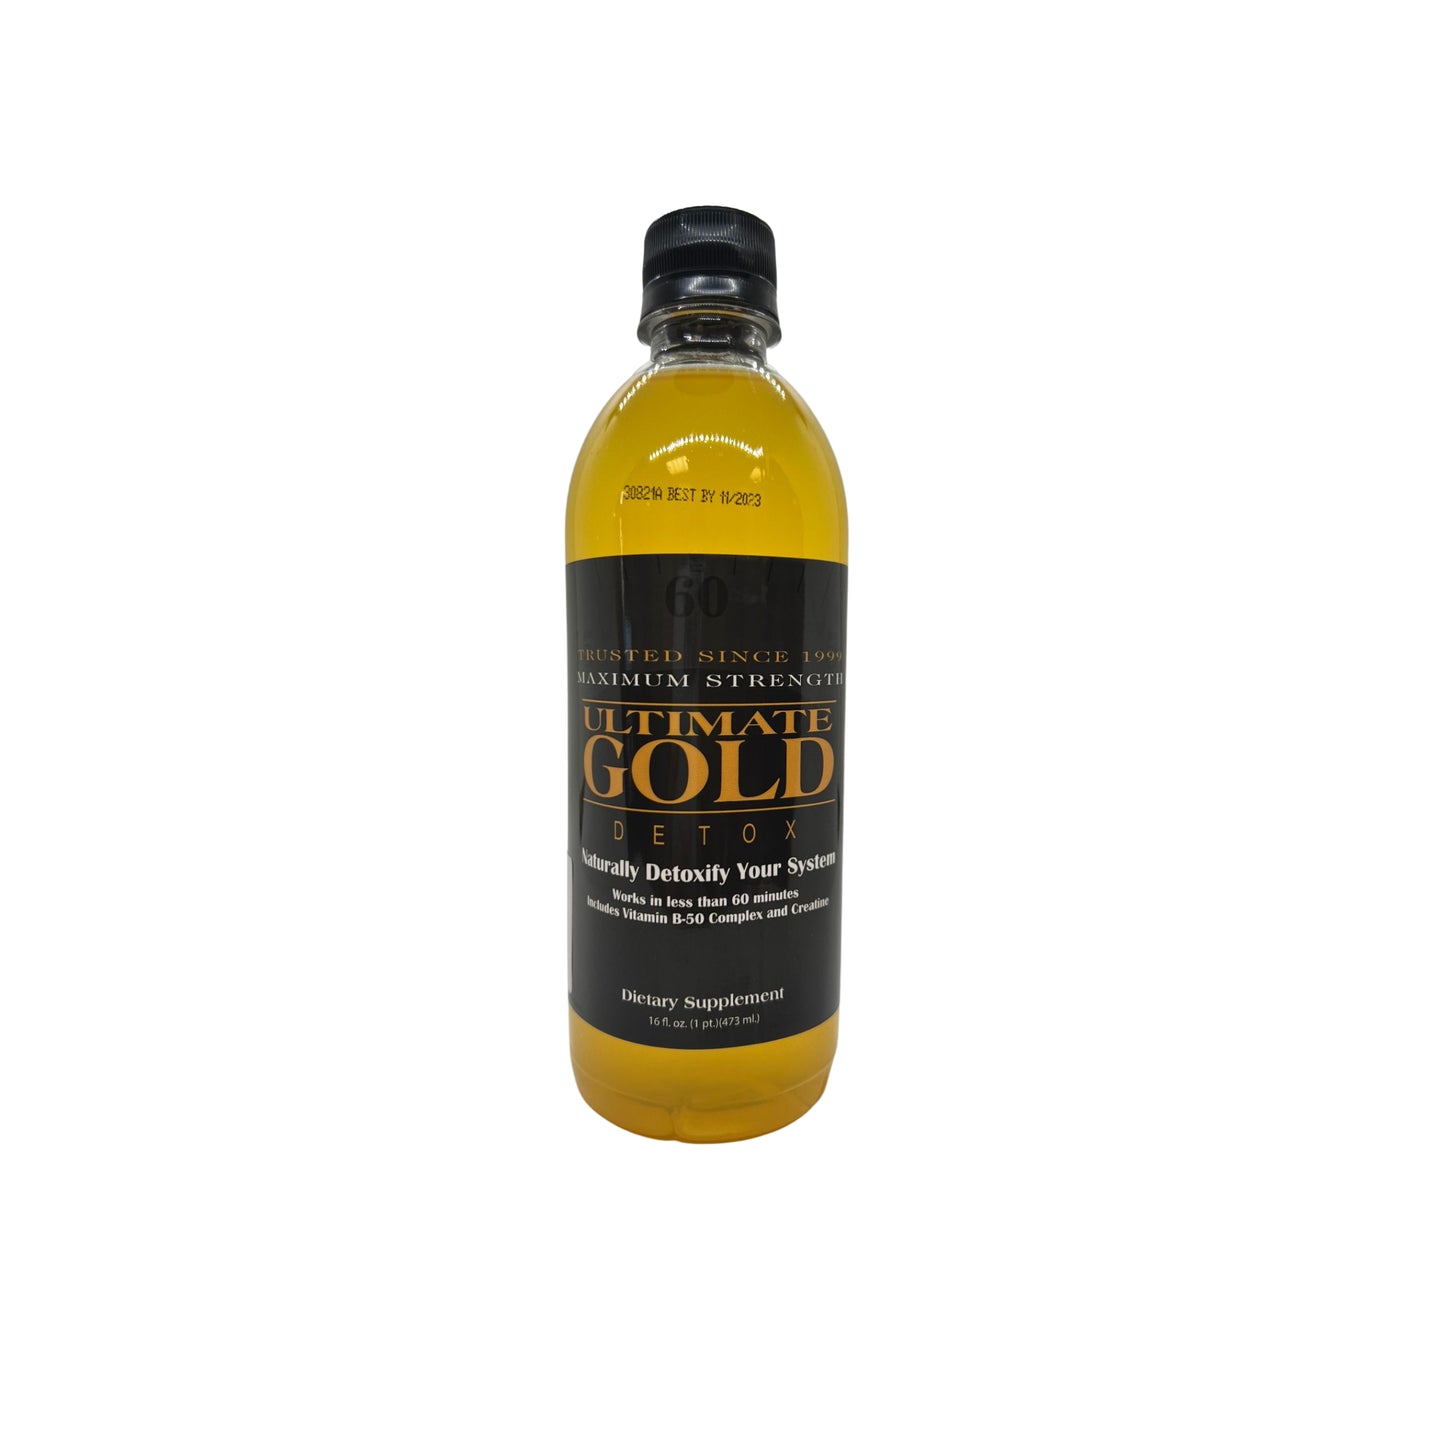 Ultimate Gold Detox - Dietary Supplement